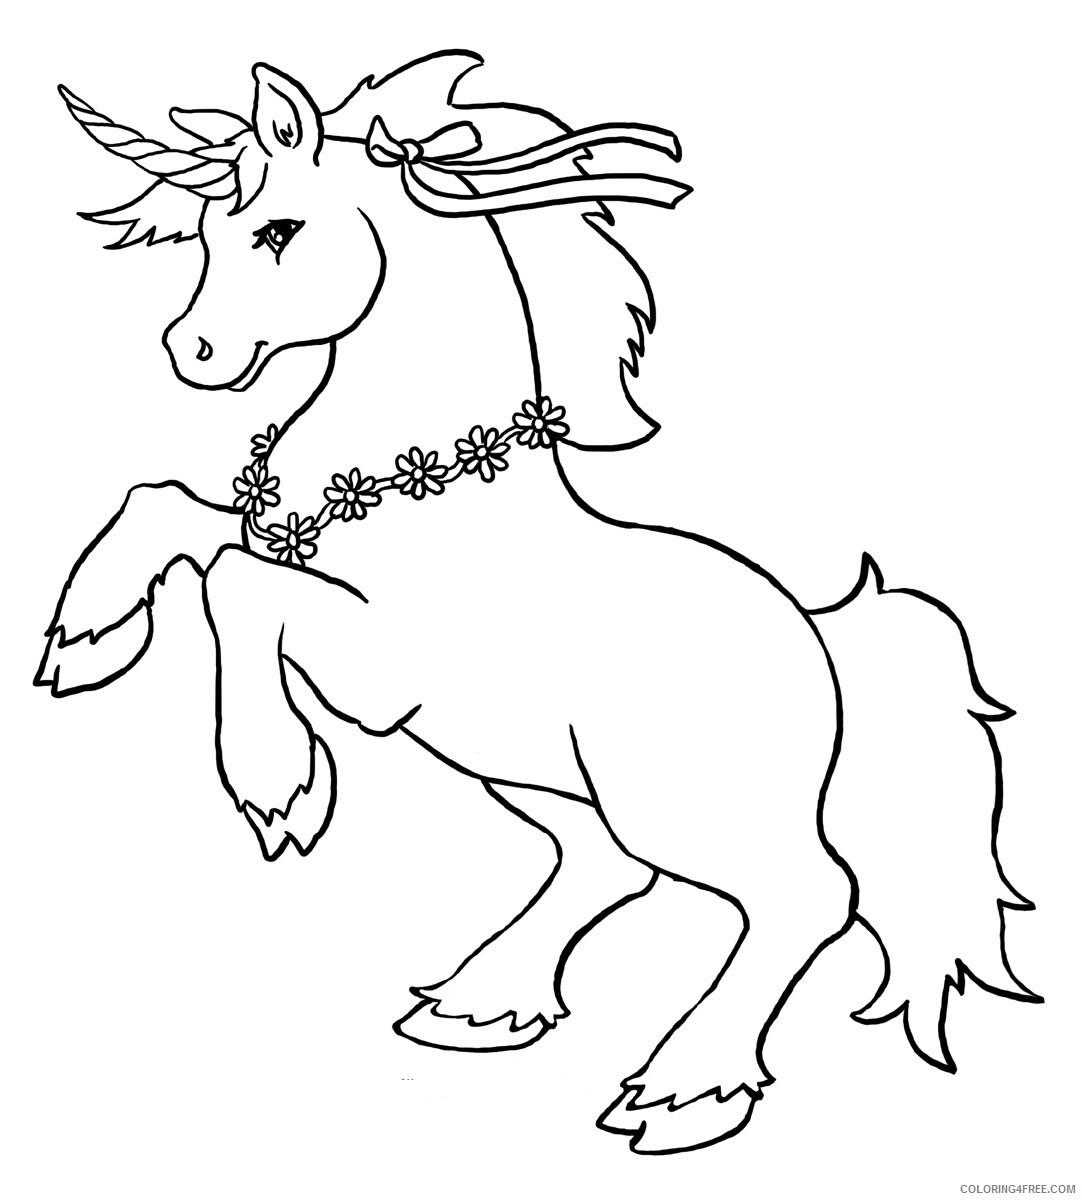 Unicorn Coloring Pages about unicorn 1 Printable 2021 6018 Coloring4free